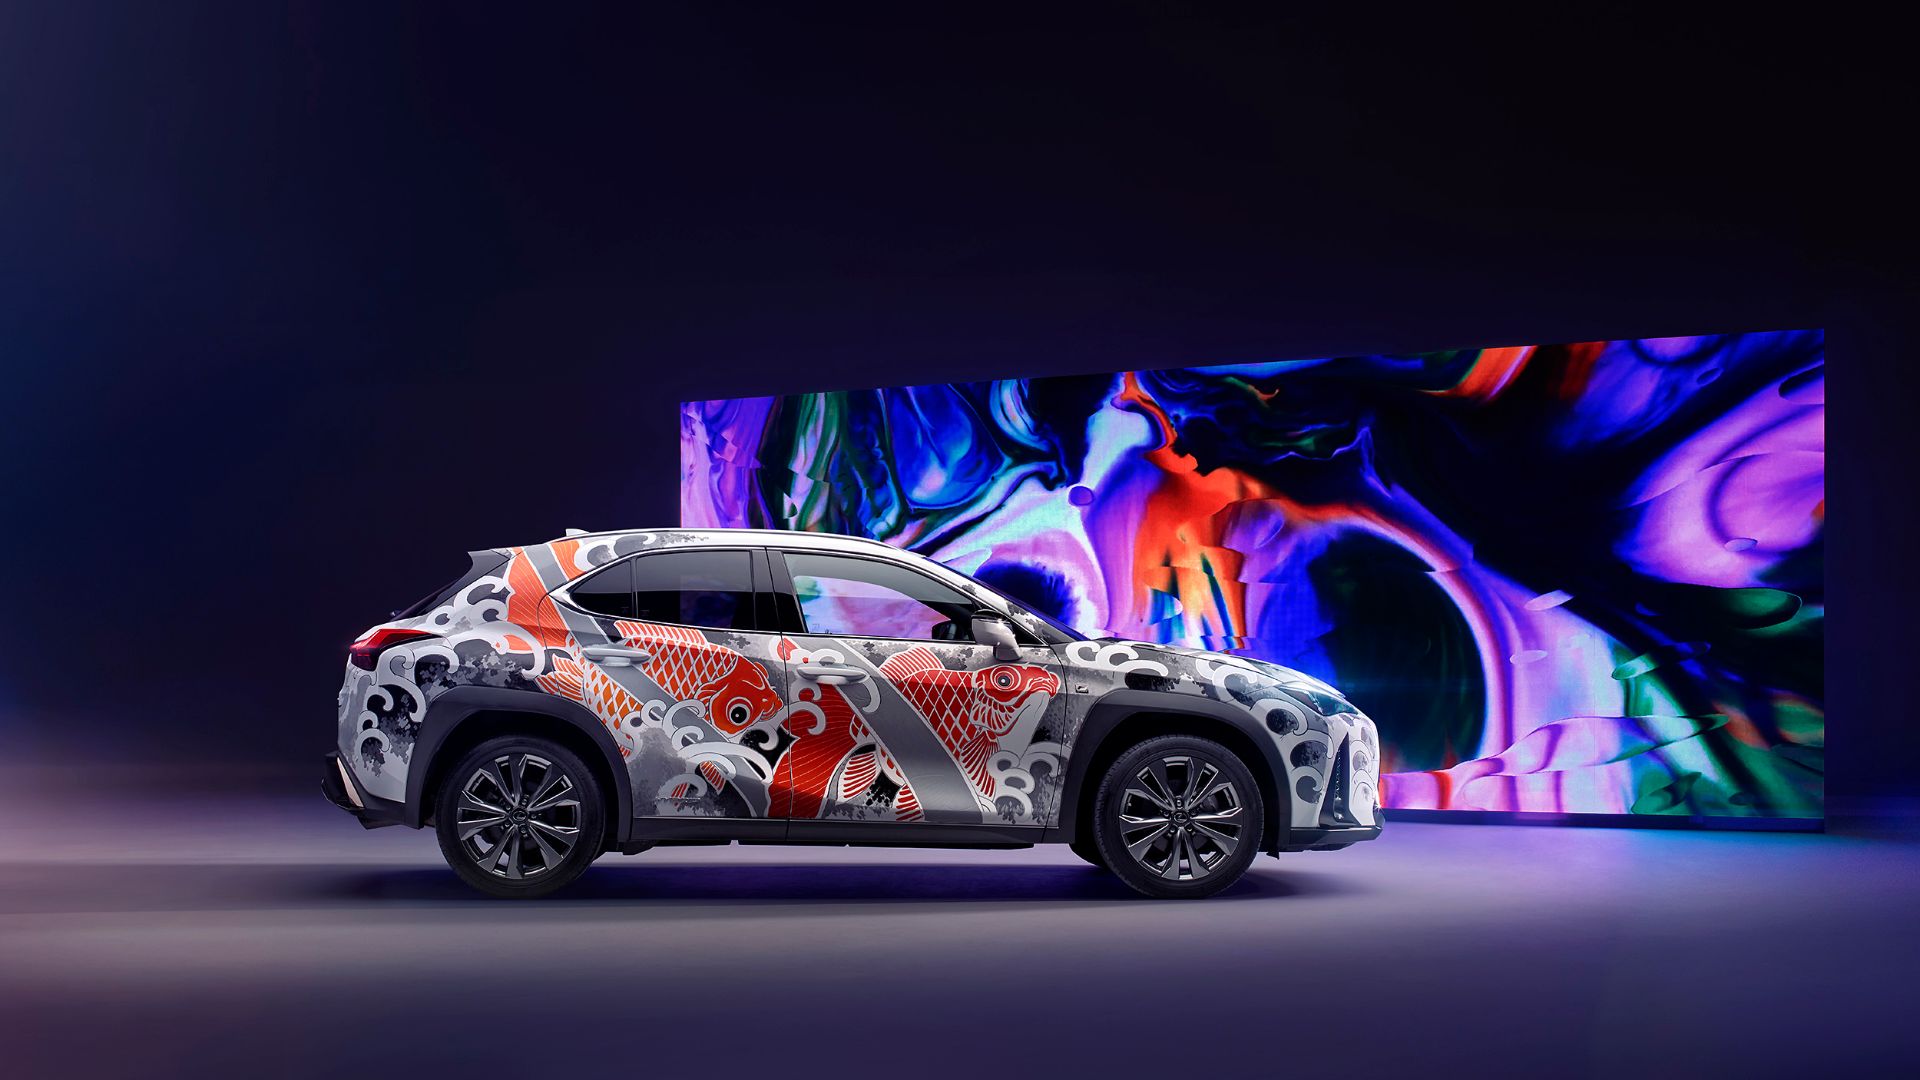 Lexus UX is the world's first tattooed car